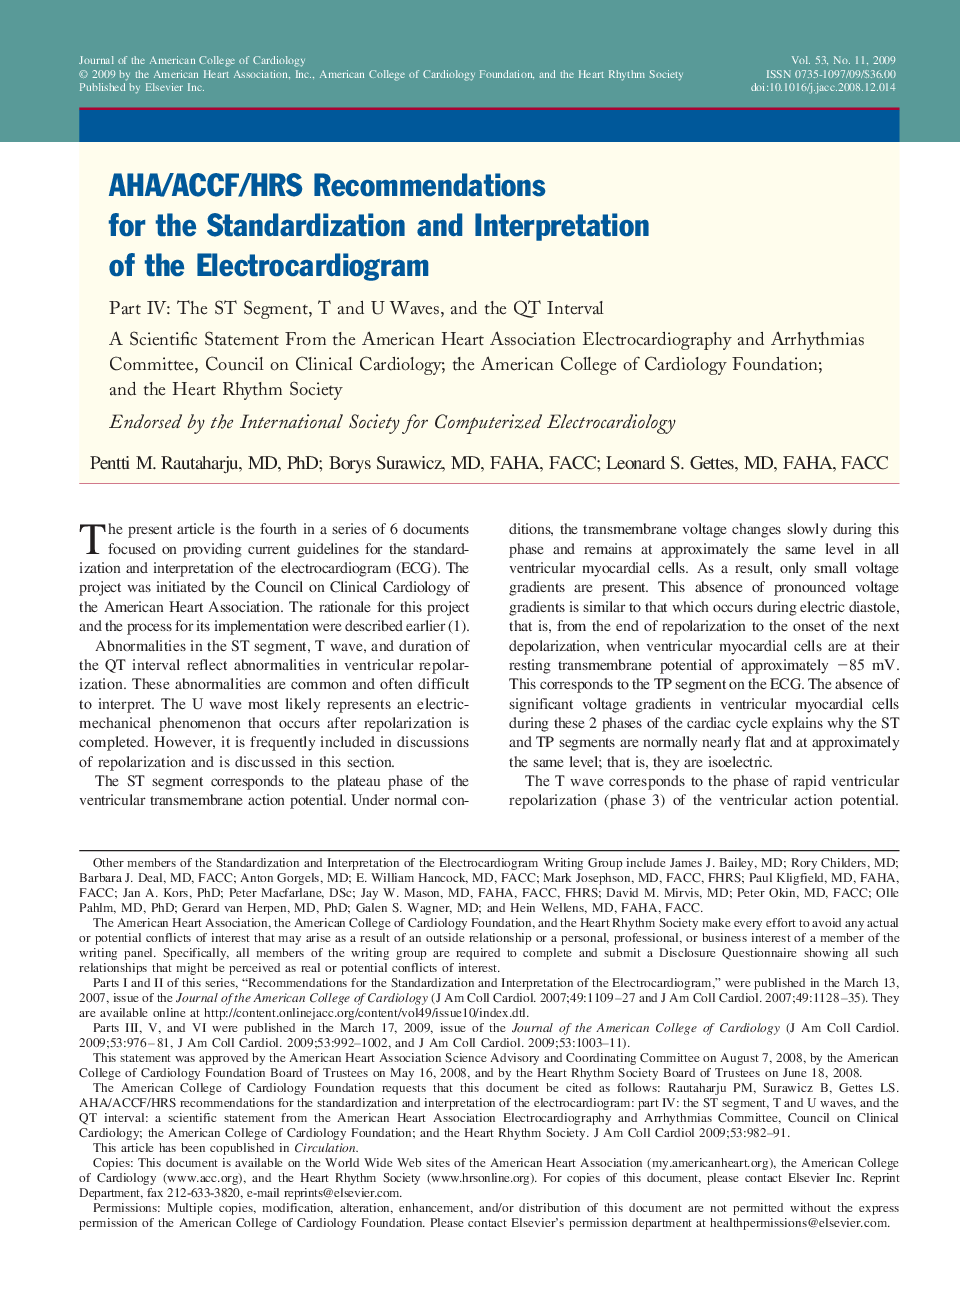 AHA/ACCF/HRS Recommendations for the Standardization and Interpretation of the Electrocardiogram